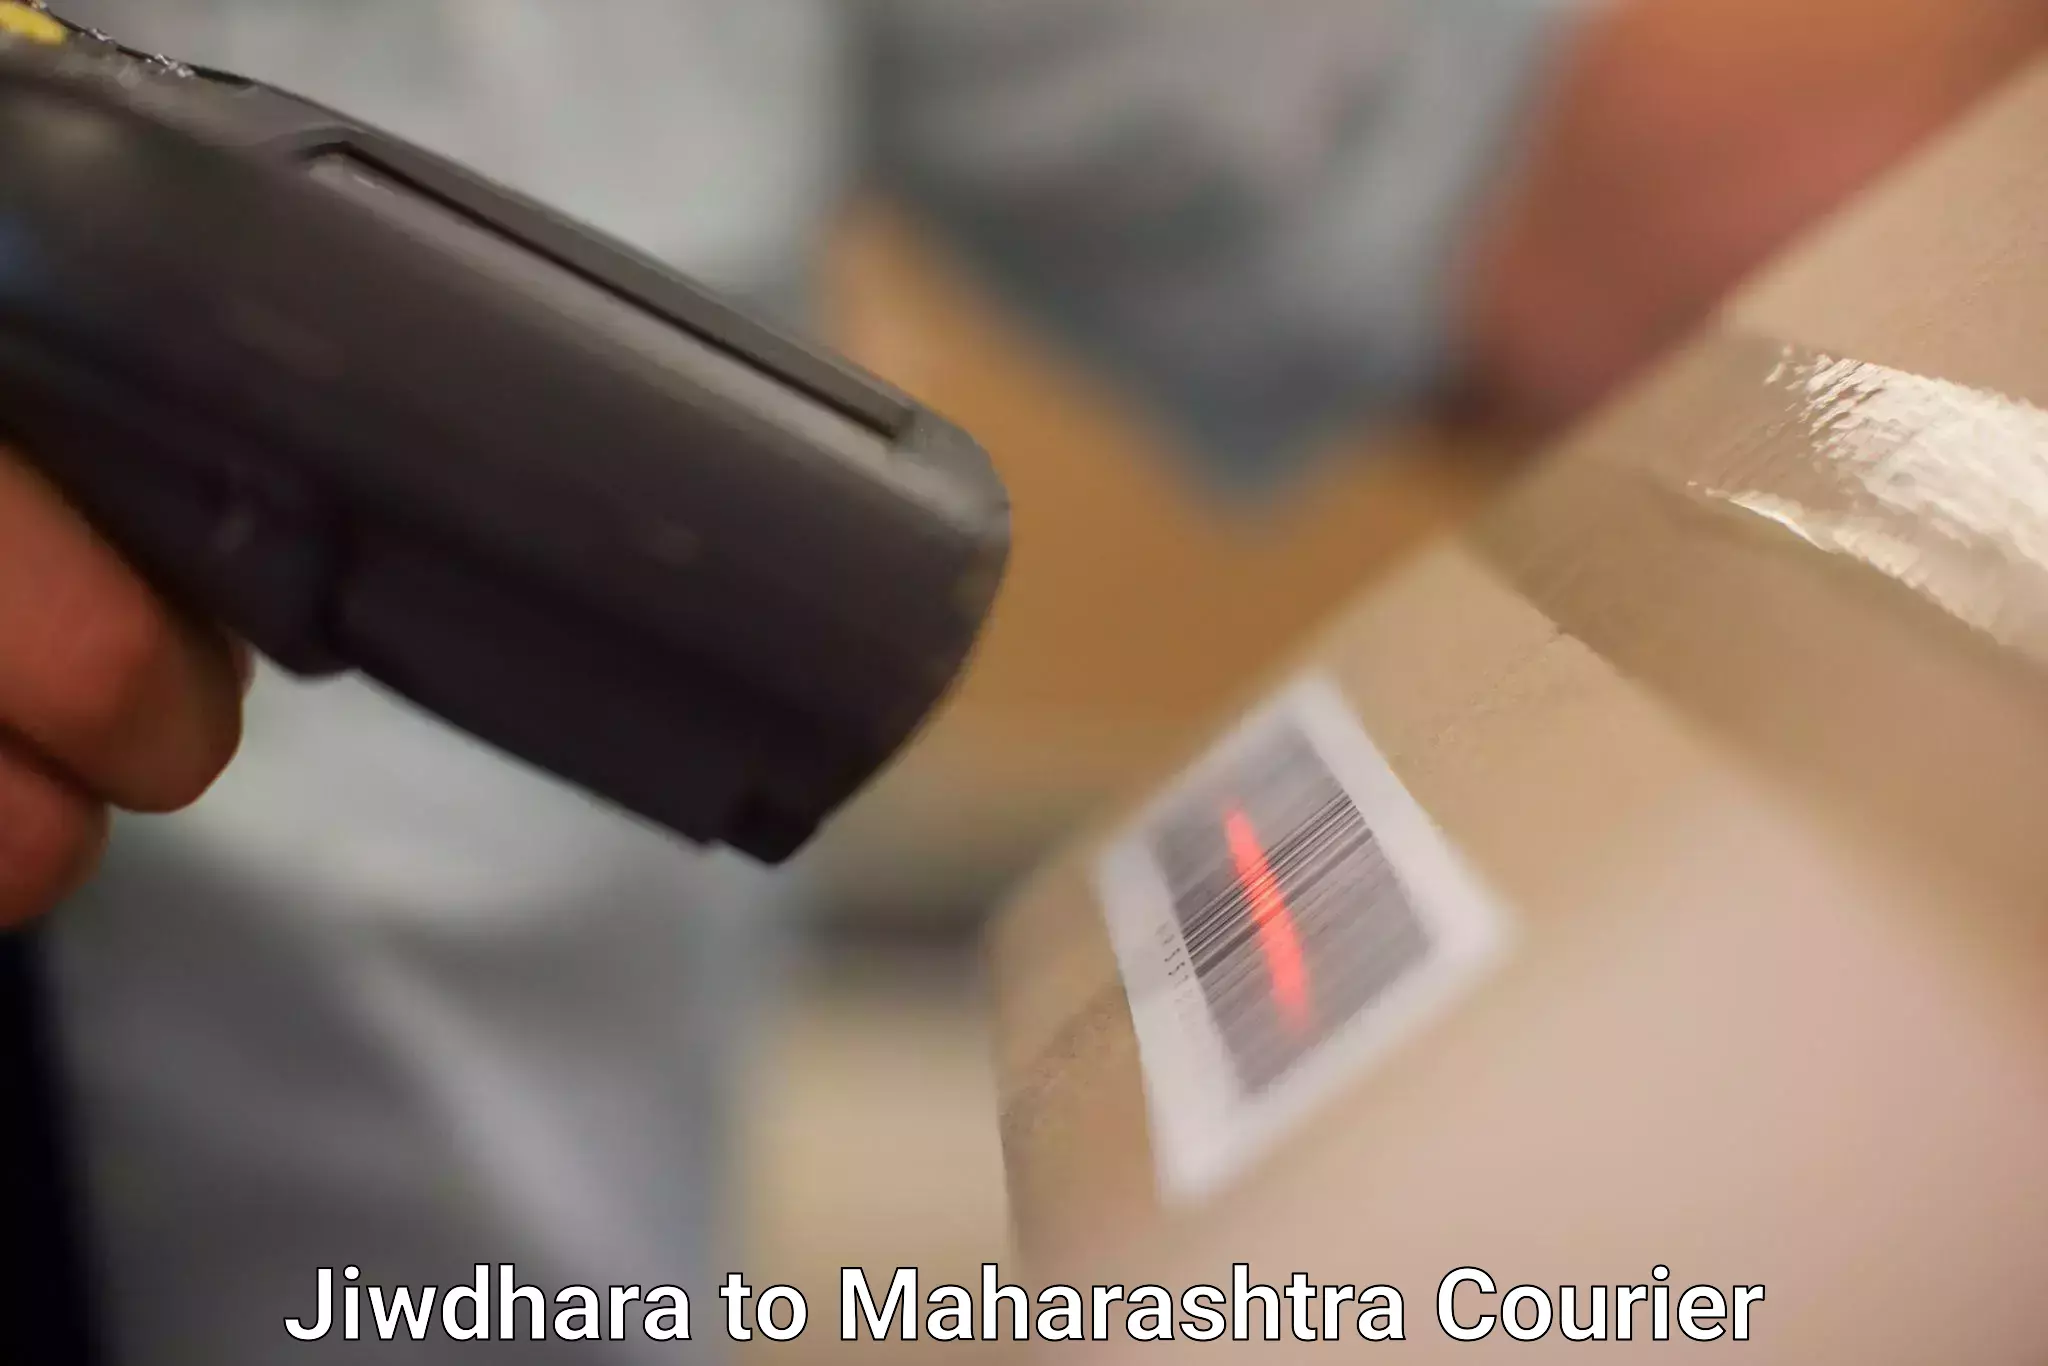 Parcel service for businesses Jiwdhara to Chiplun